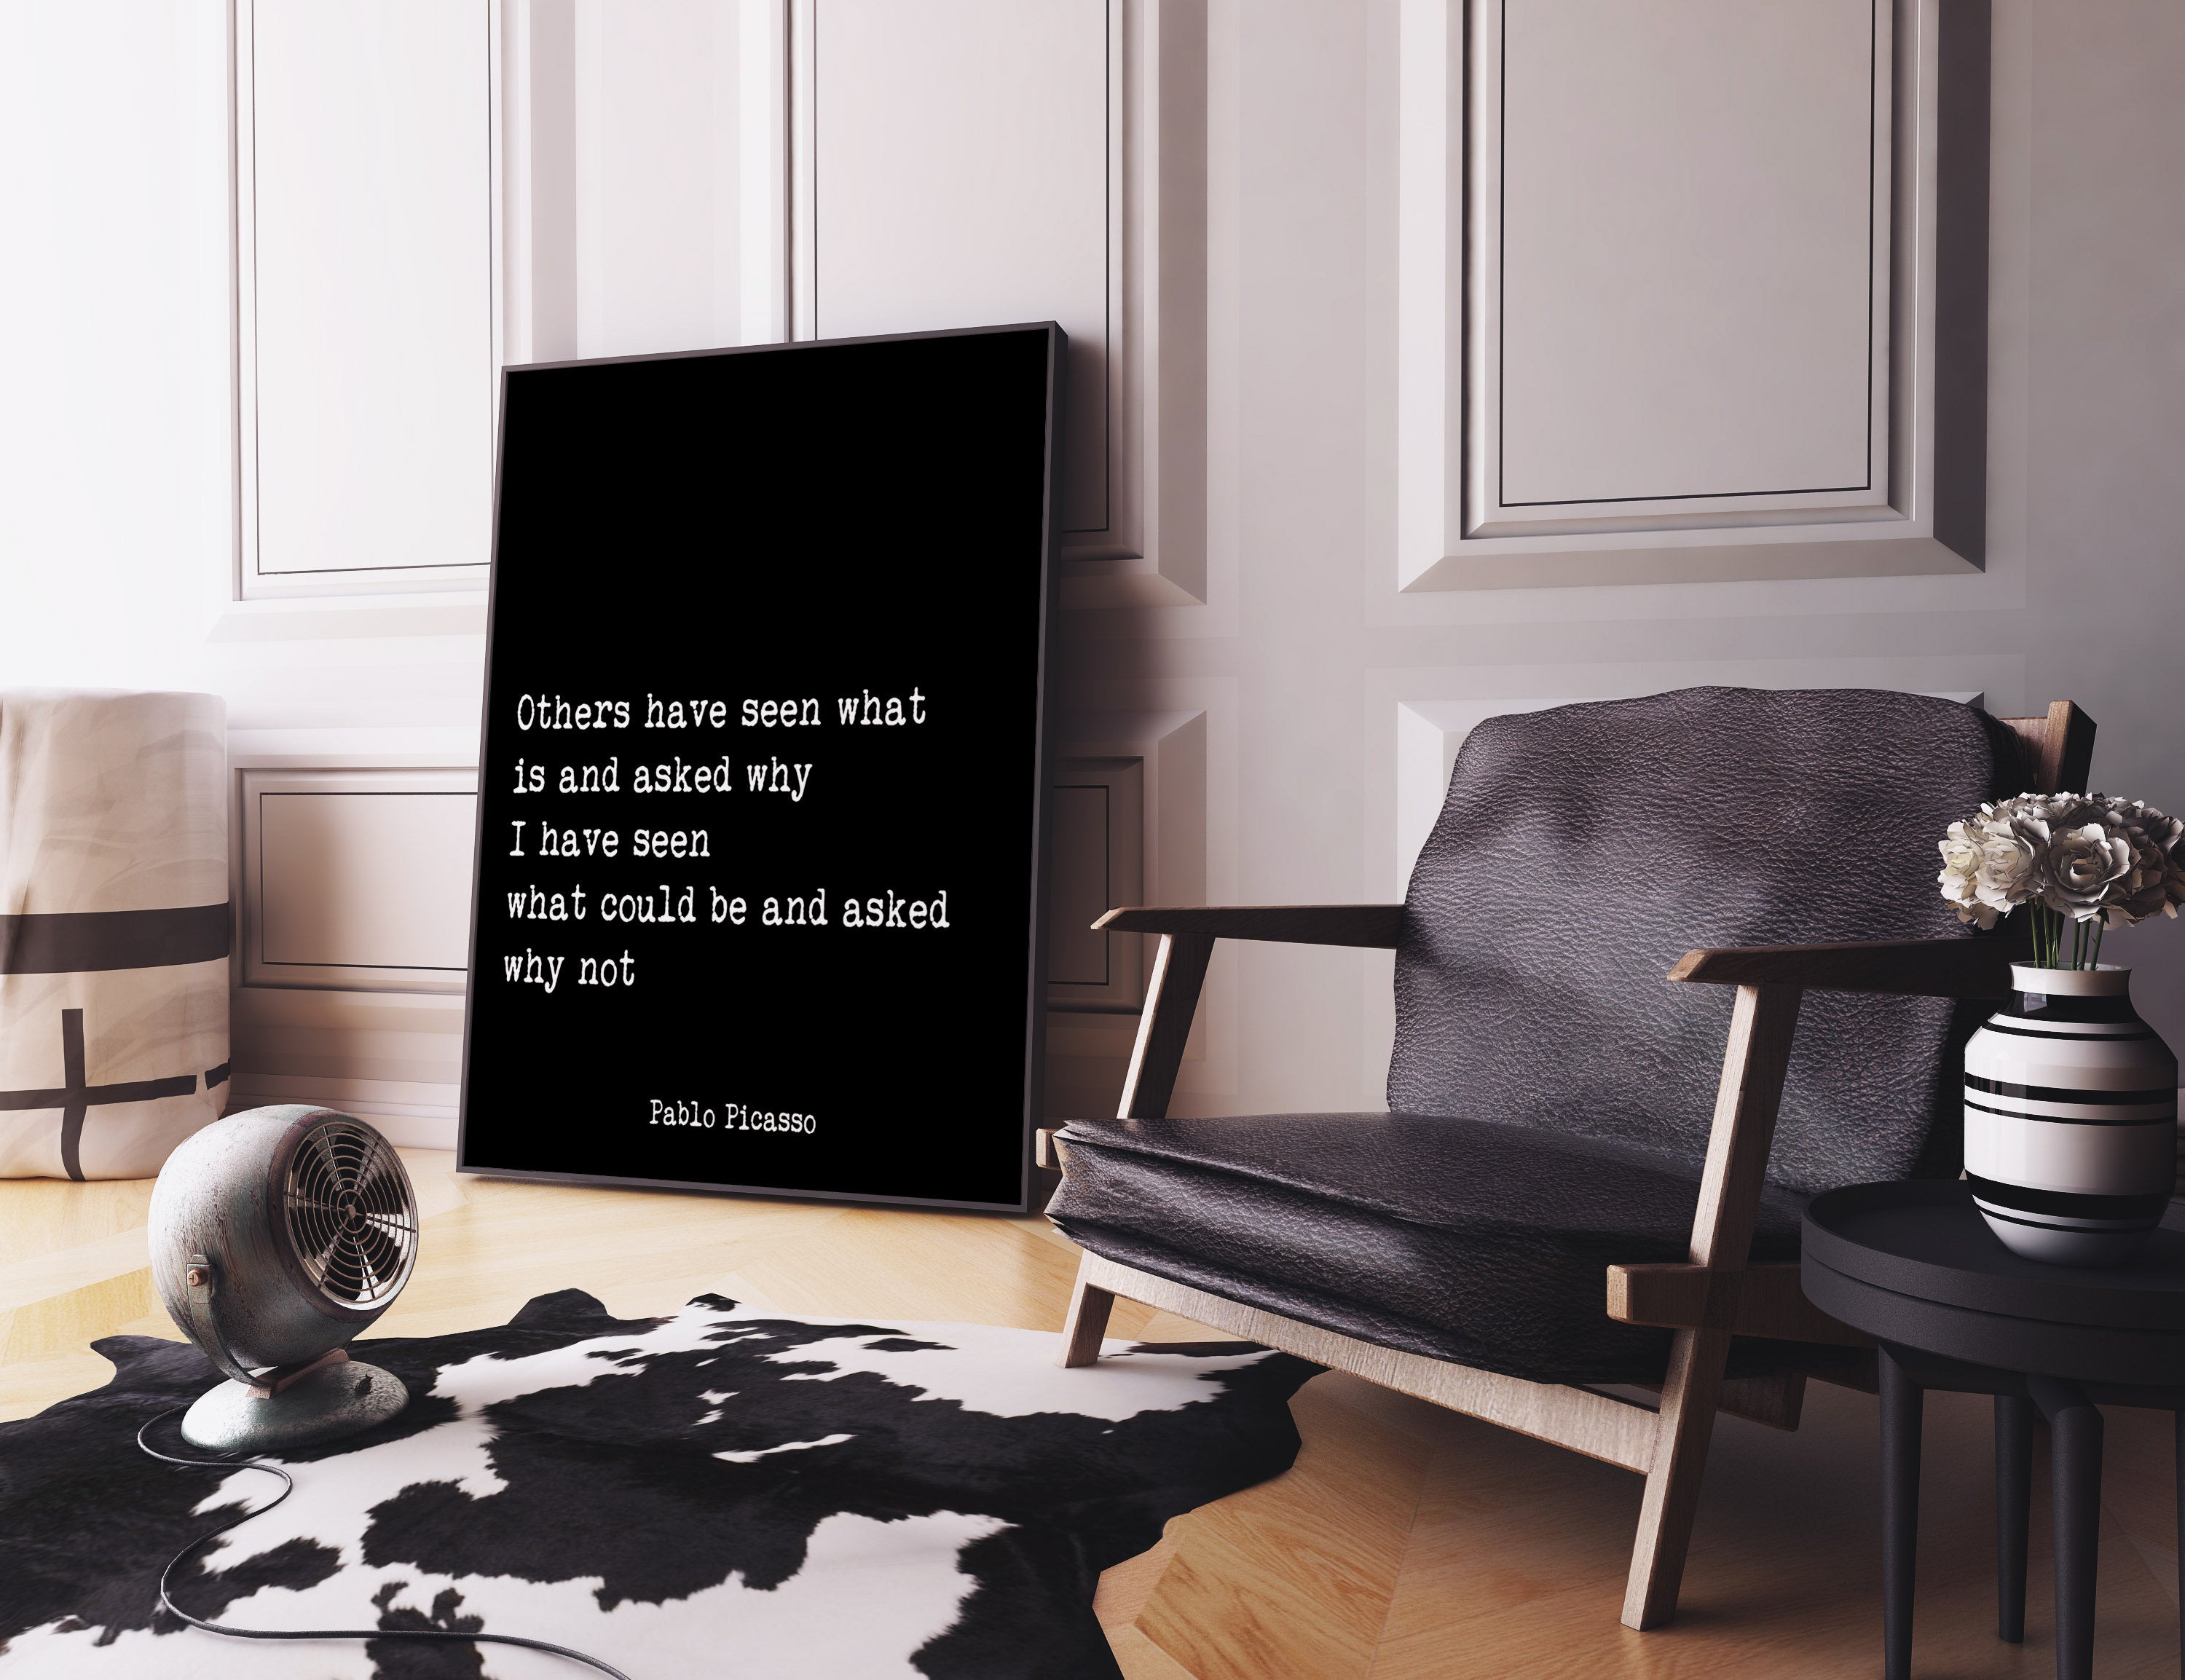 Pablo Picasso Quote Print, Others have seen what is and asked why, black and white print, home decor Unframed - BookQuoteDecor